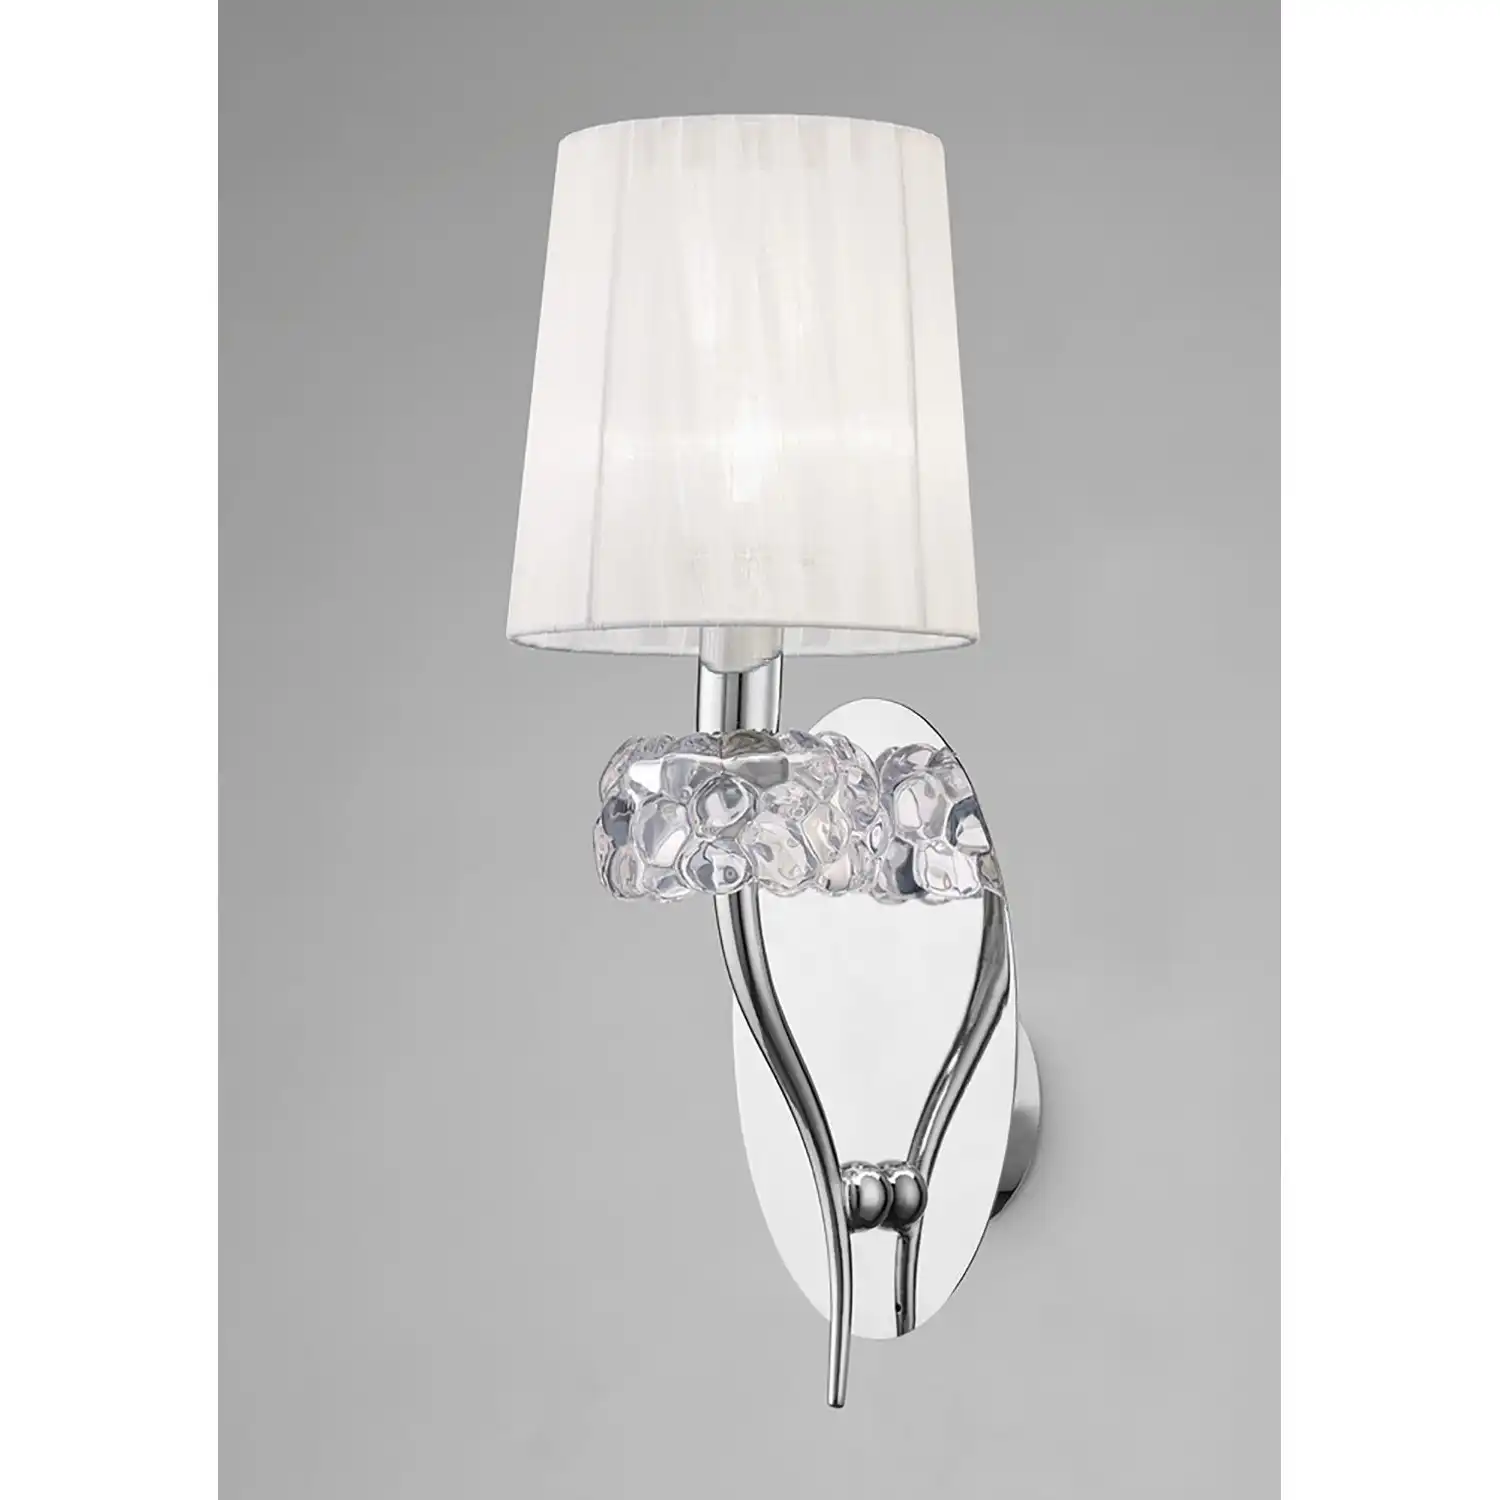 Loewe Wall Lamp Switched 1 Light E14, Polished Chrome With White Shade